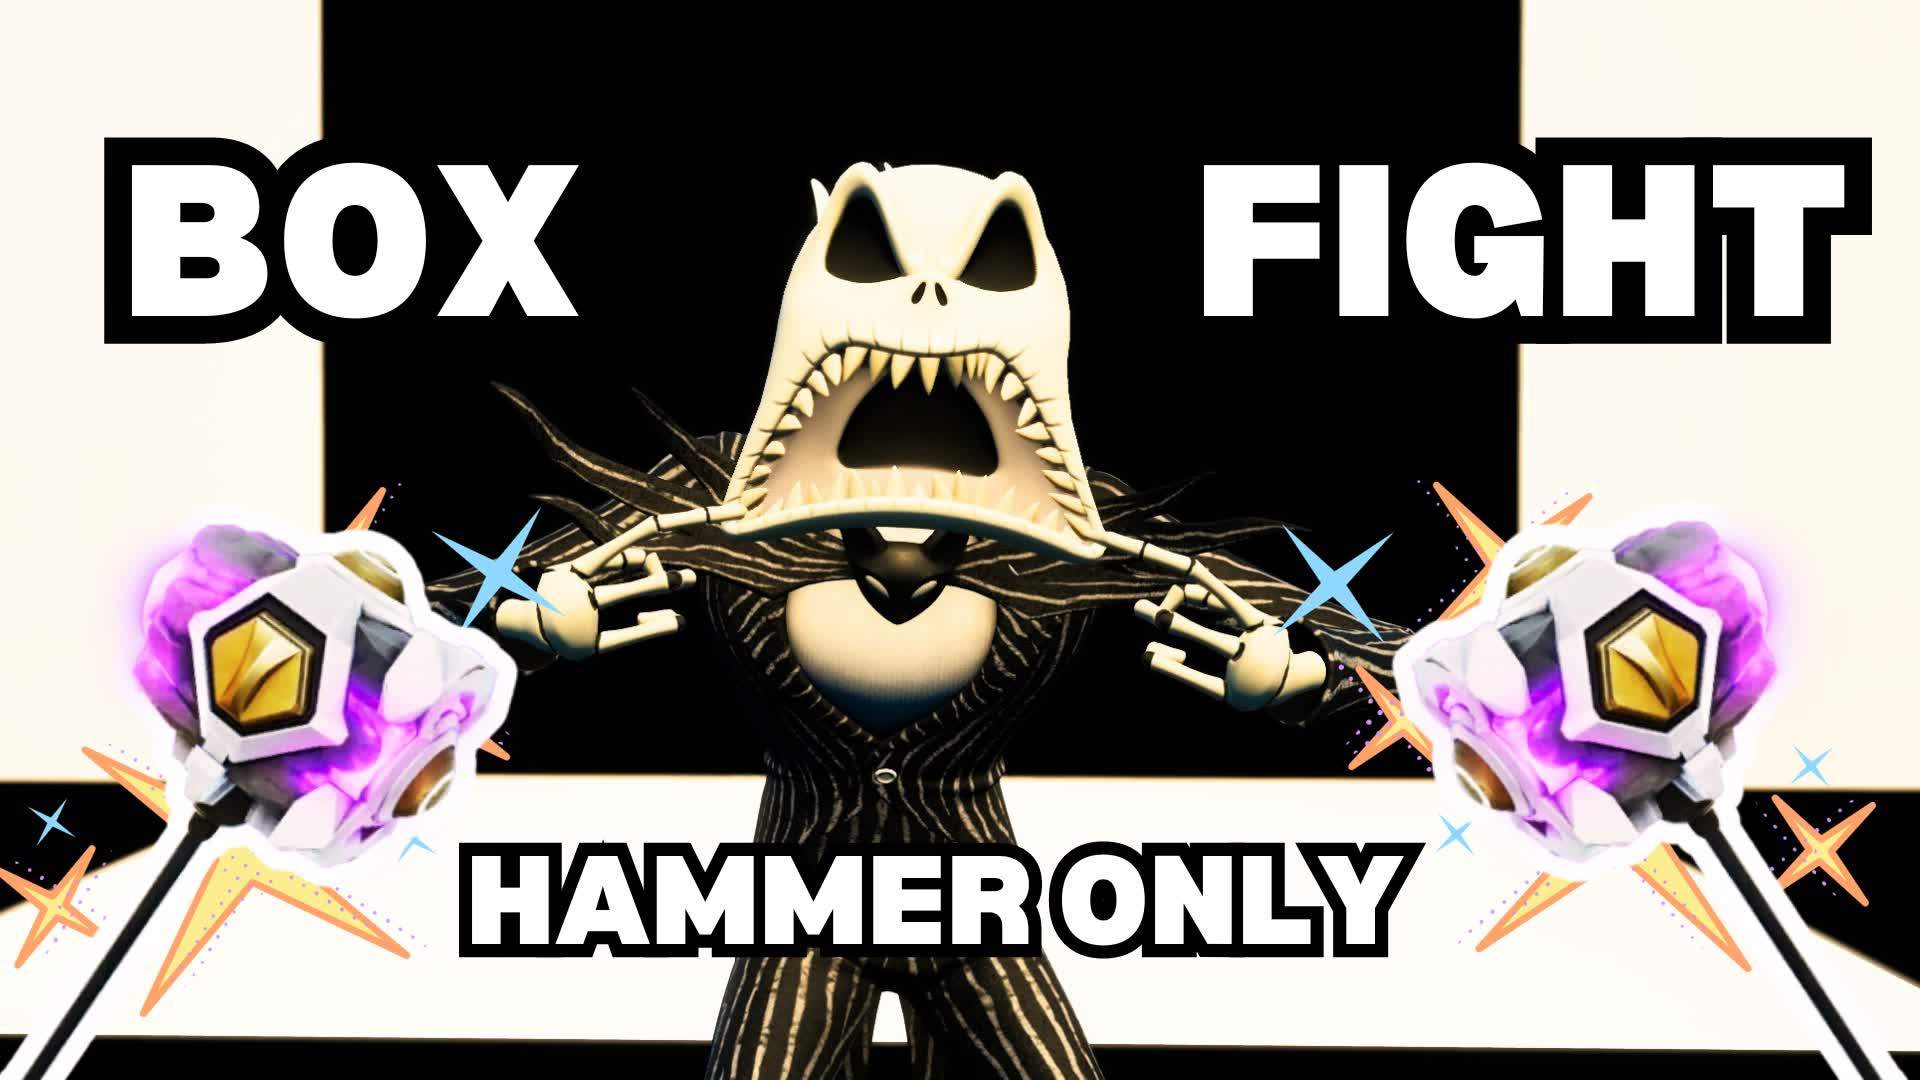 BOX FIGHT HAMMER ONLY - BLACK AND WHITE